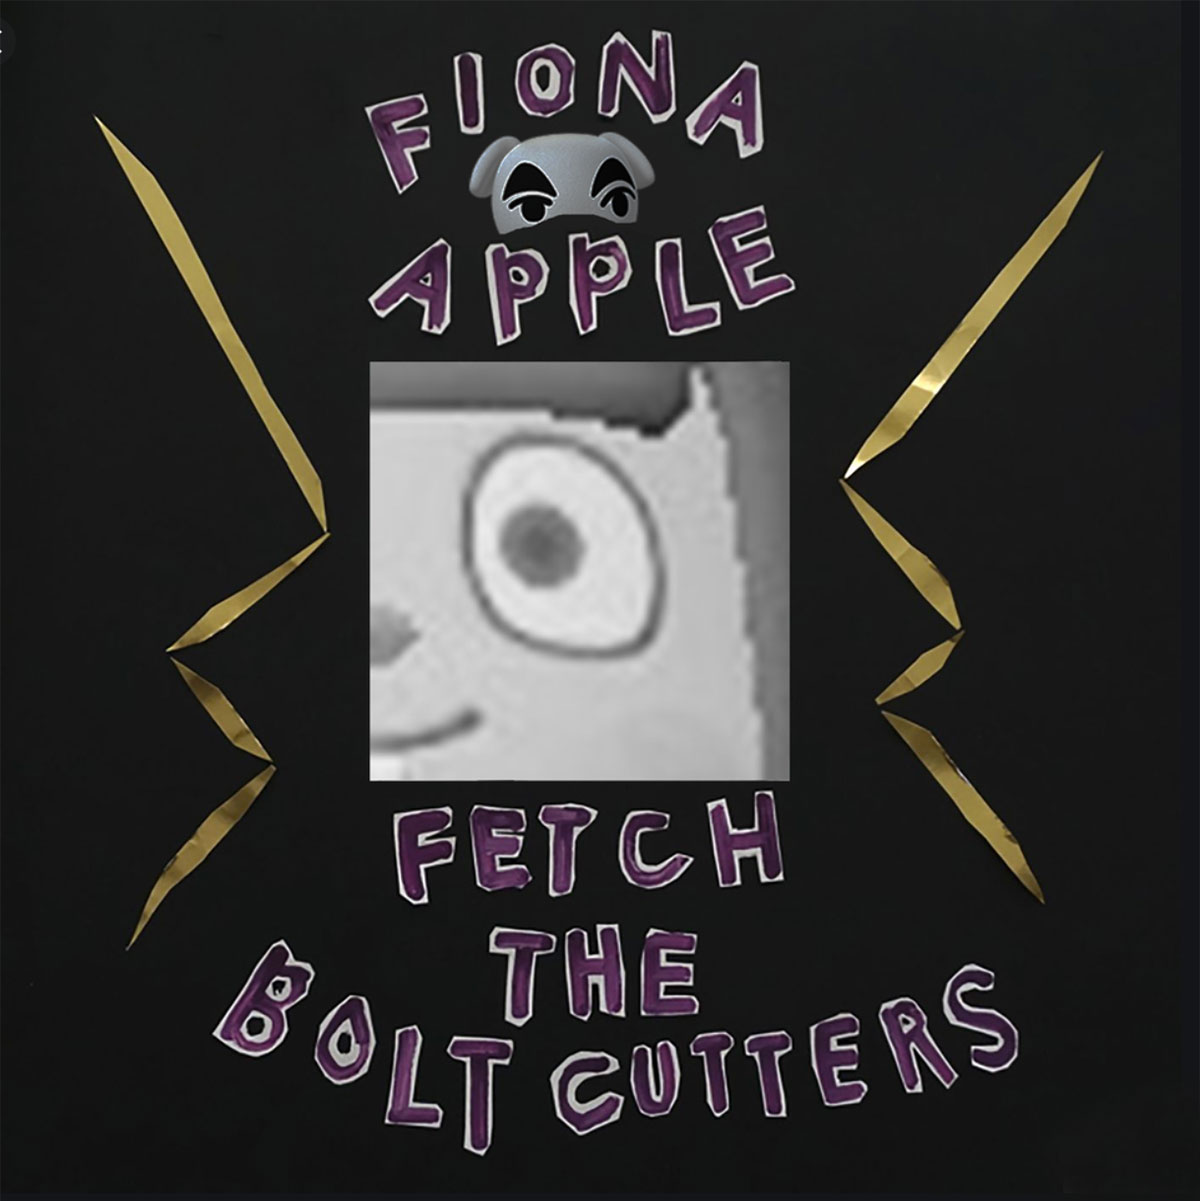 "Fetch the Bolt Cutters" by Fiona Apple